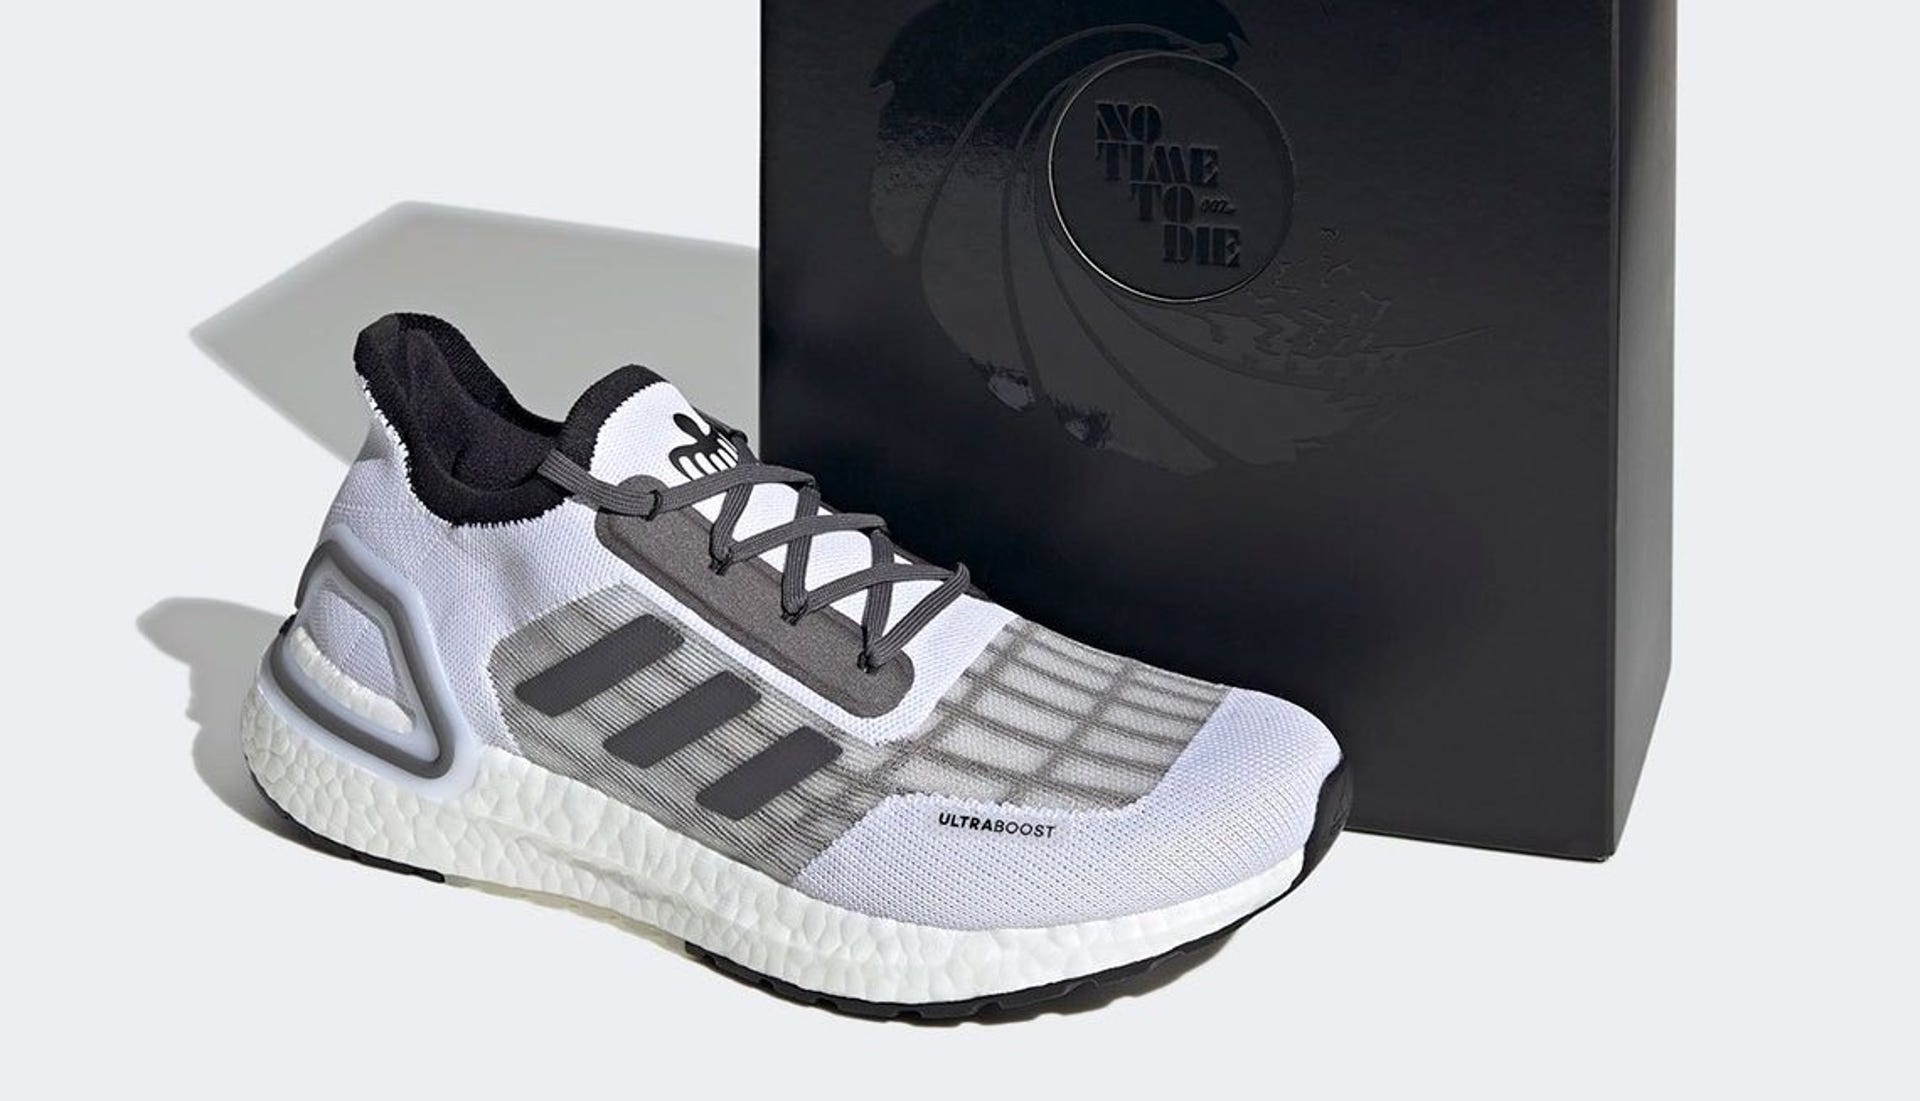 letal exhaustivo consenso James Bond 007 Adidas sneakers sneak into action with No Time to Die - CNET